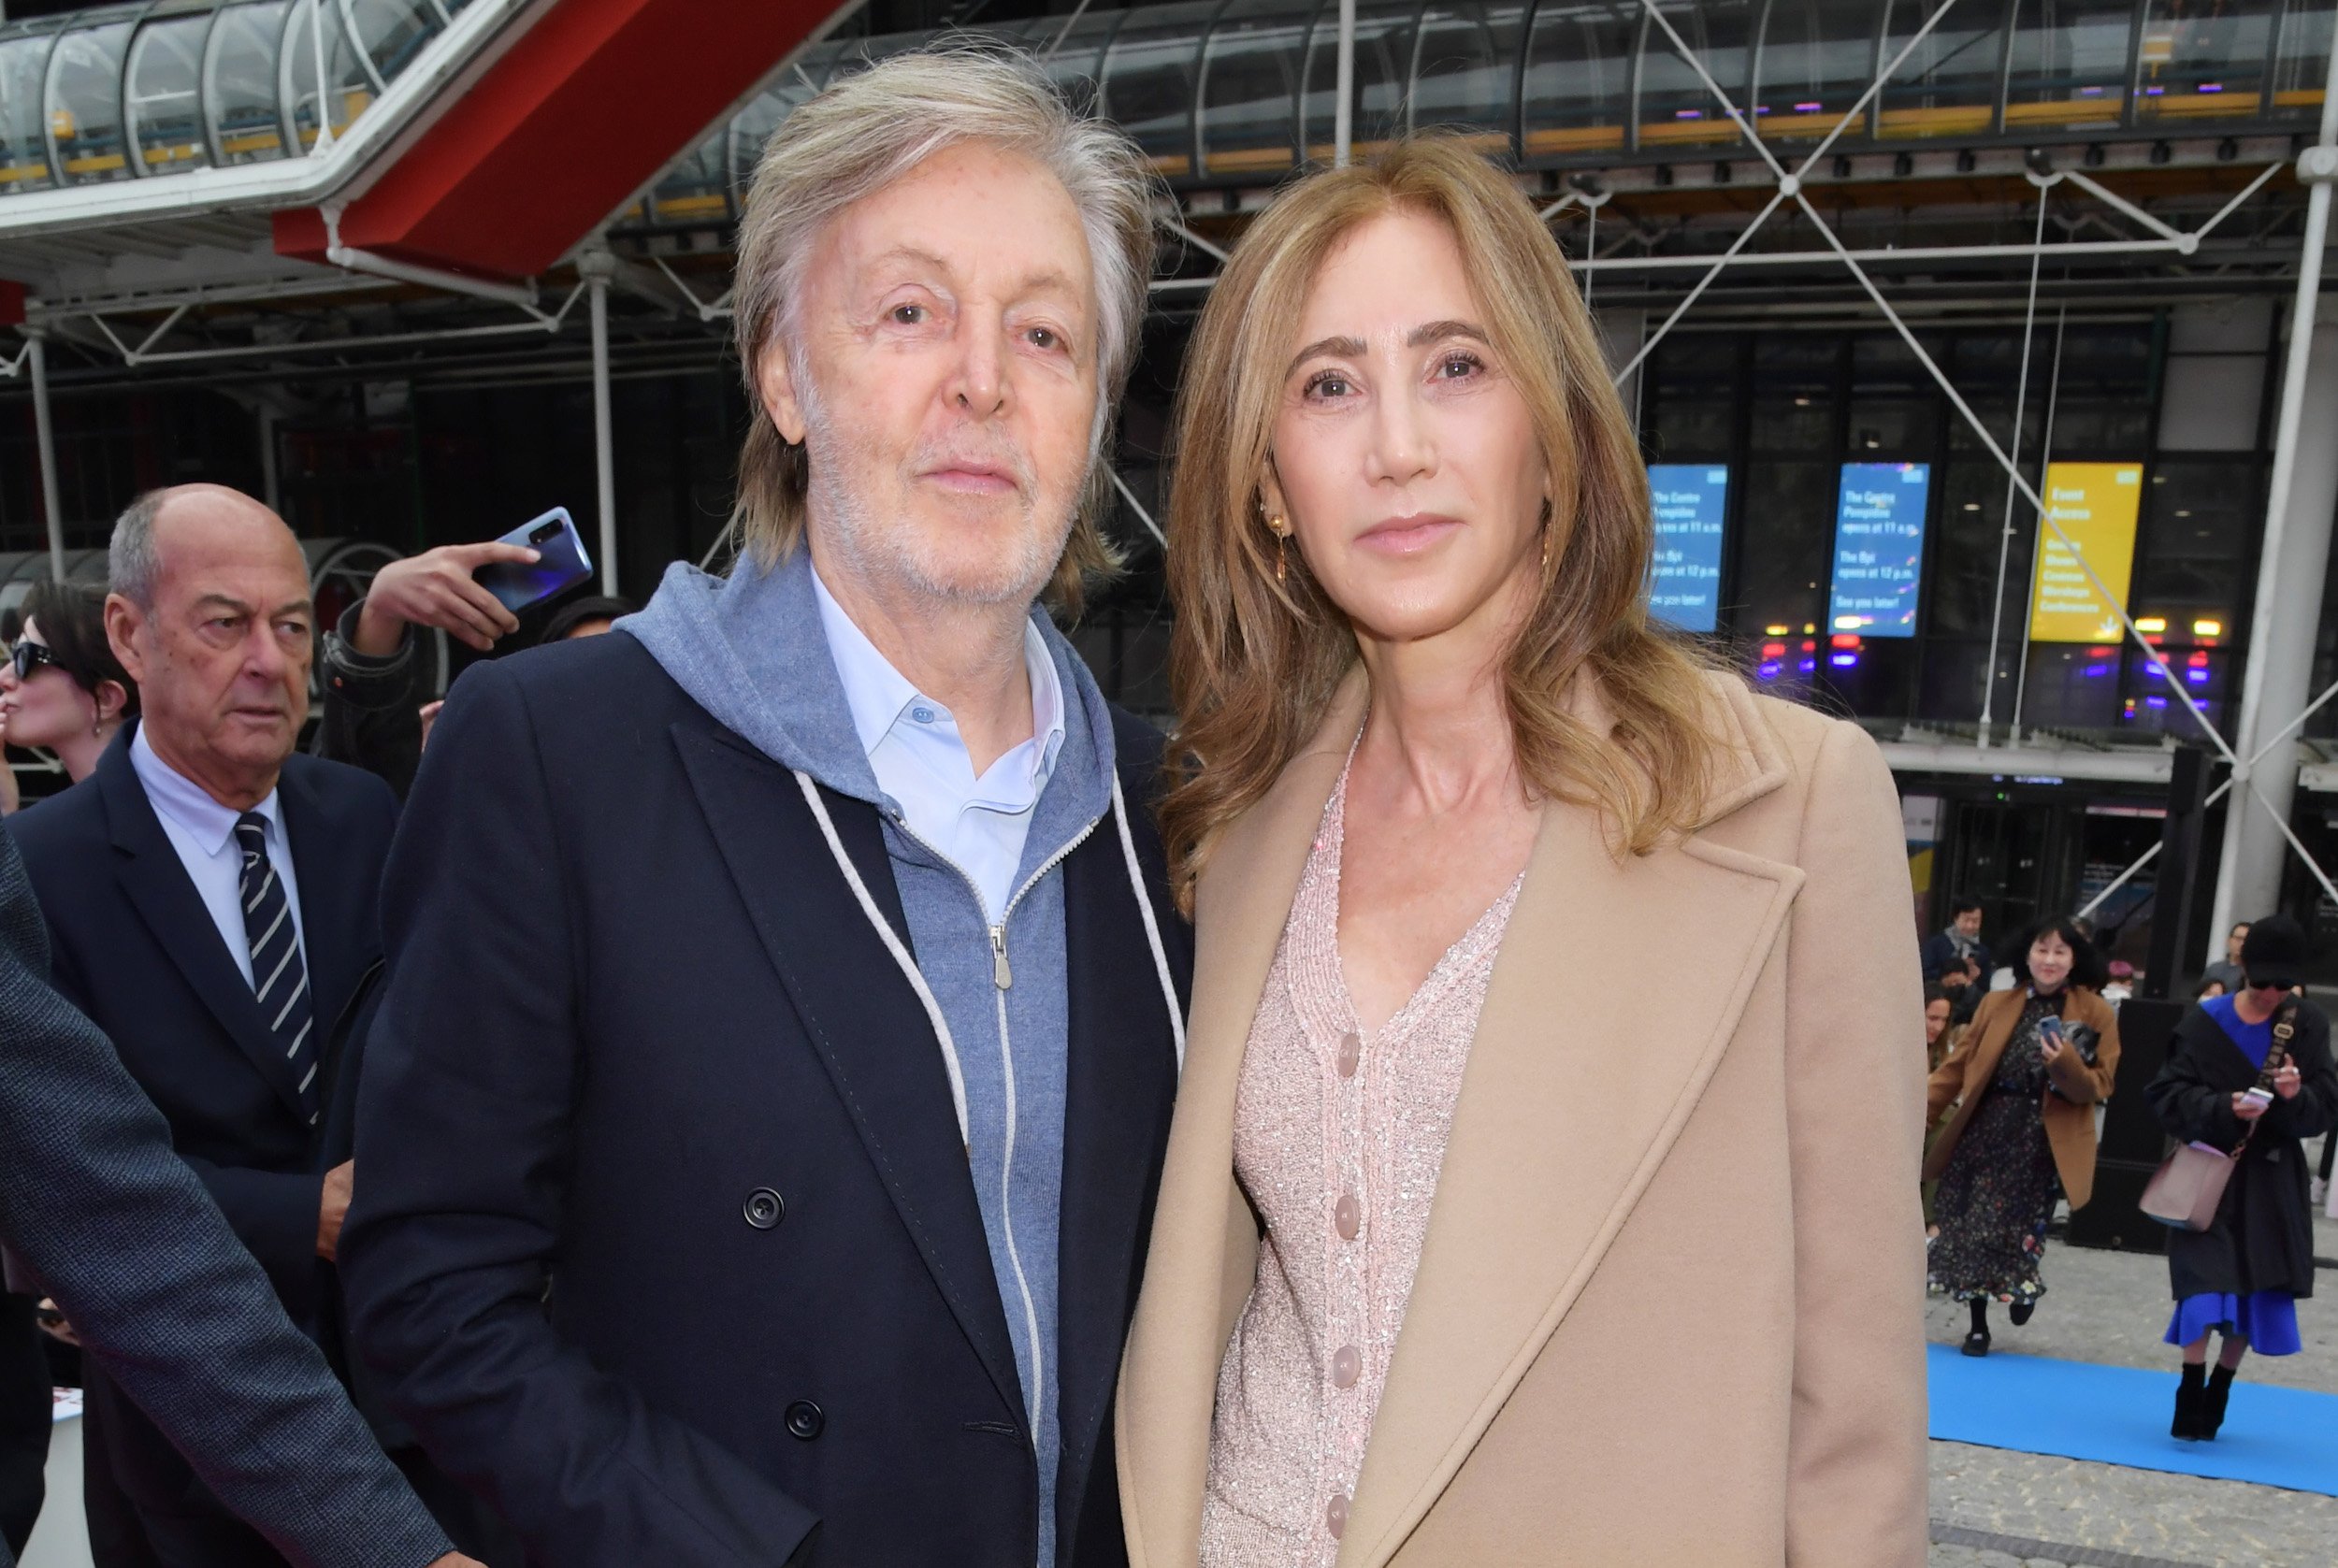 Paul McCartney asks: Will you be “My Valentine? – SheKnows